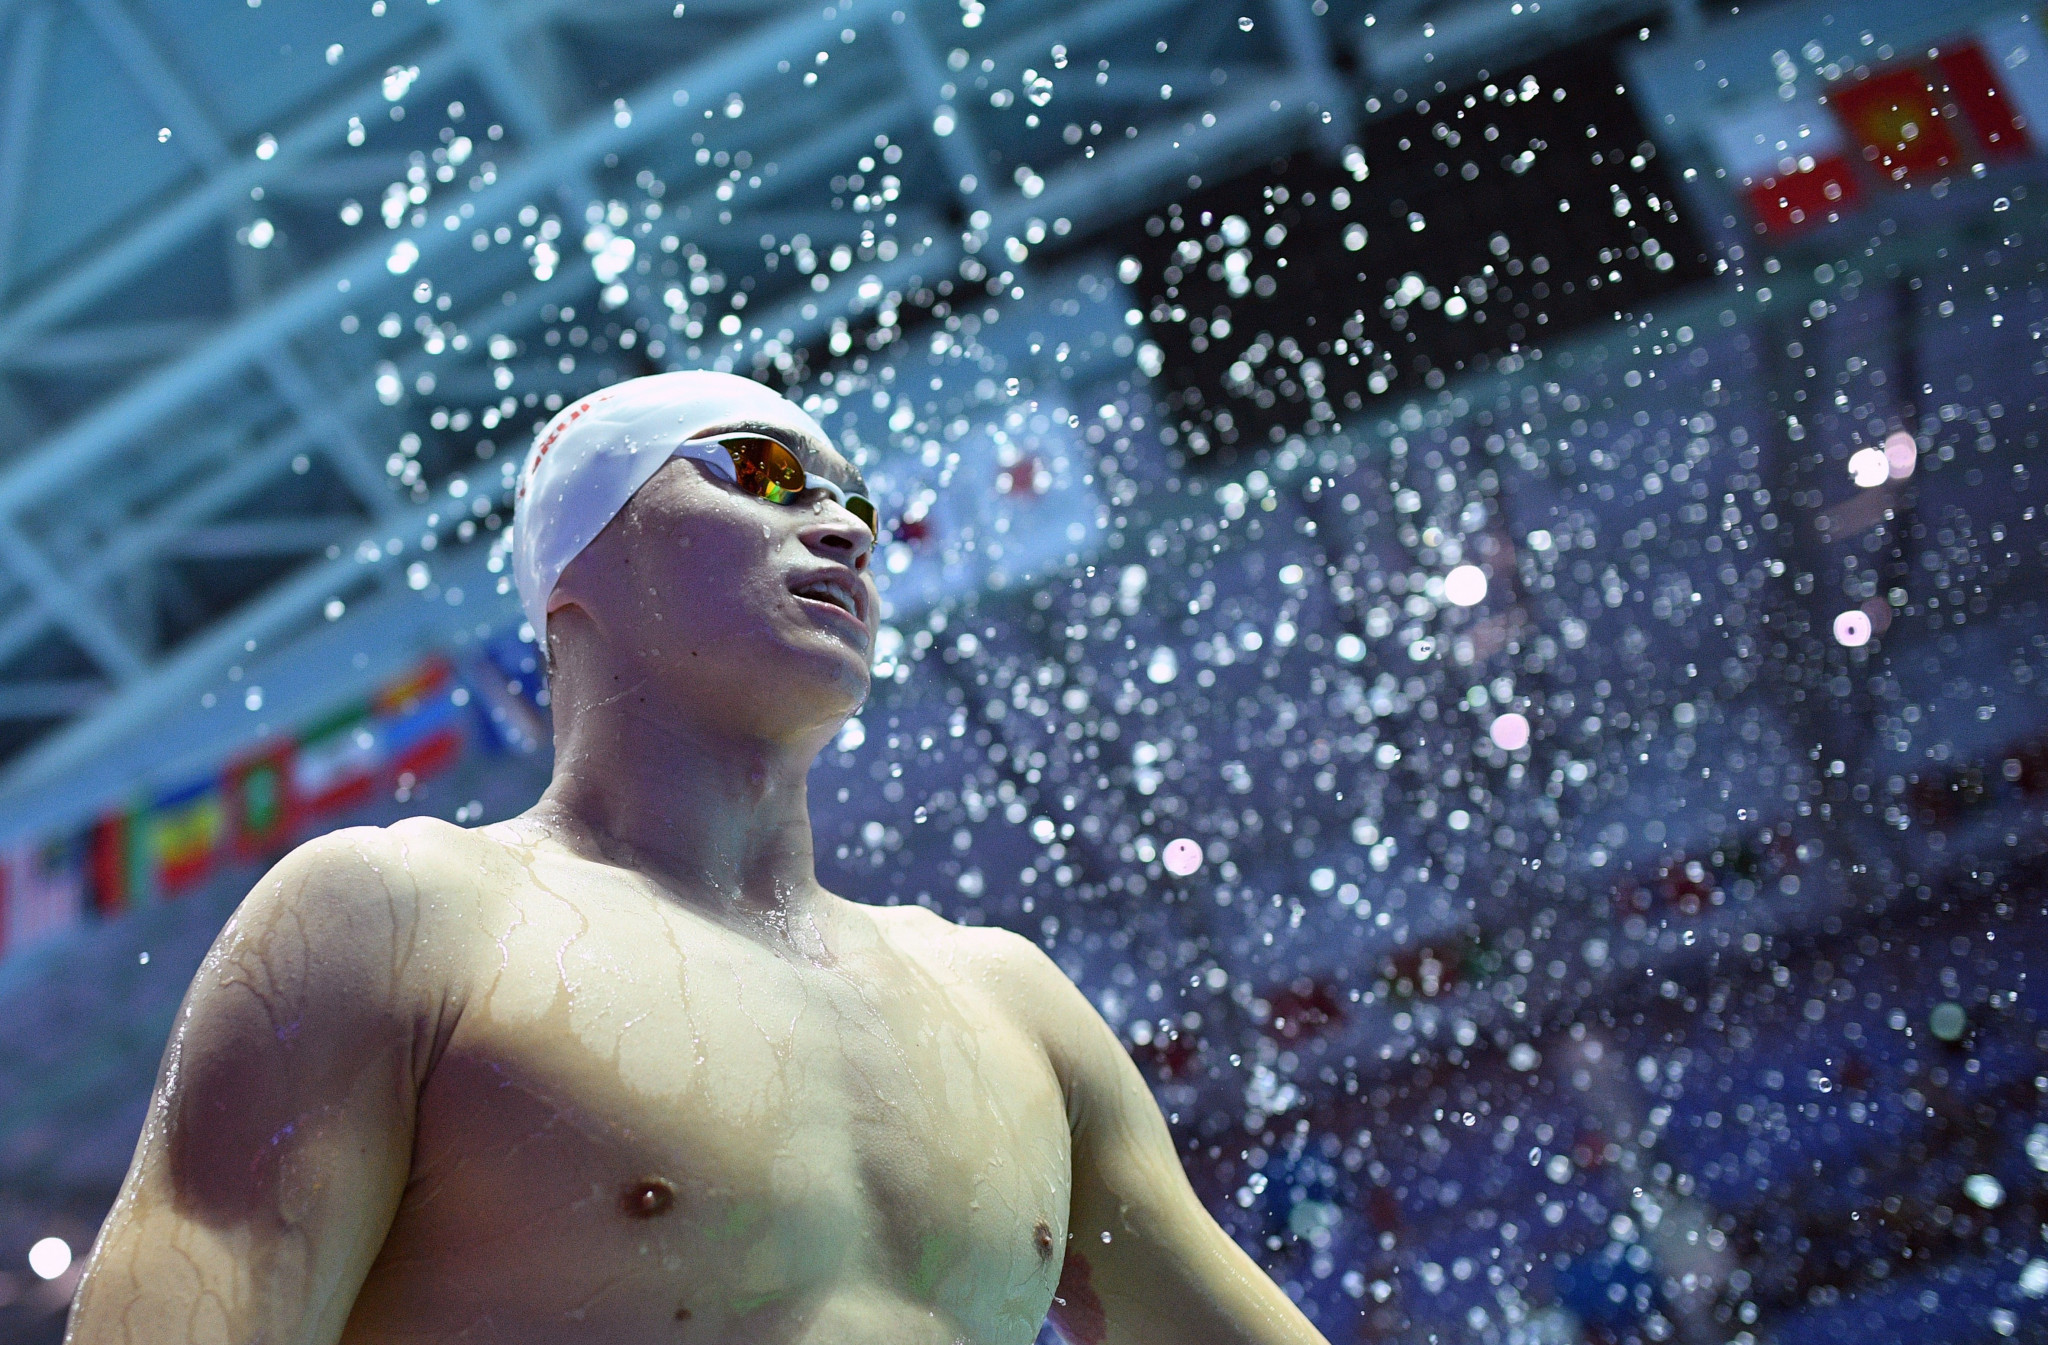 Sun Yang's CAS case against WADA will be open to the public ©Getty Images